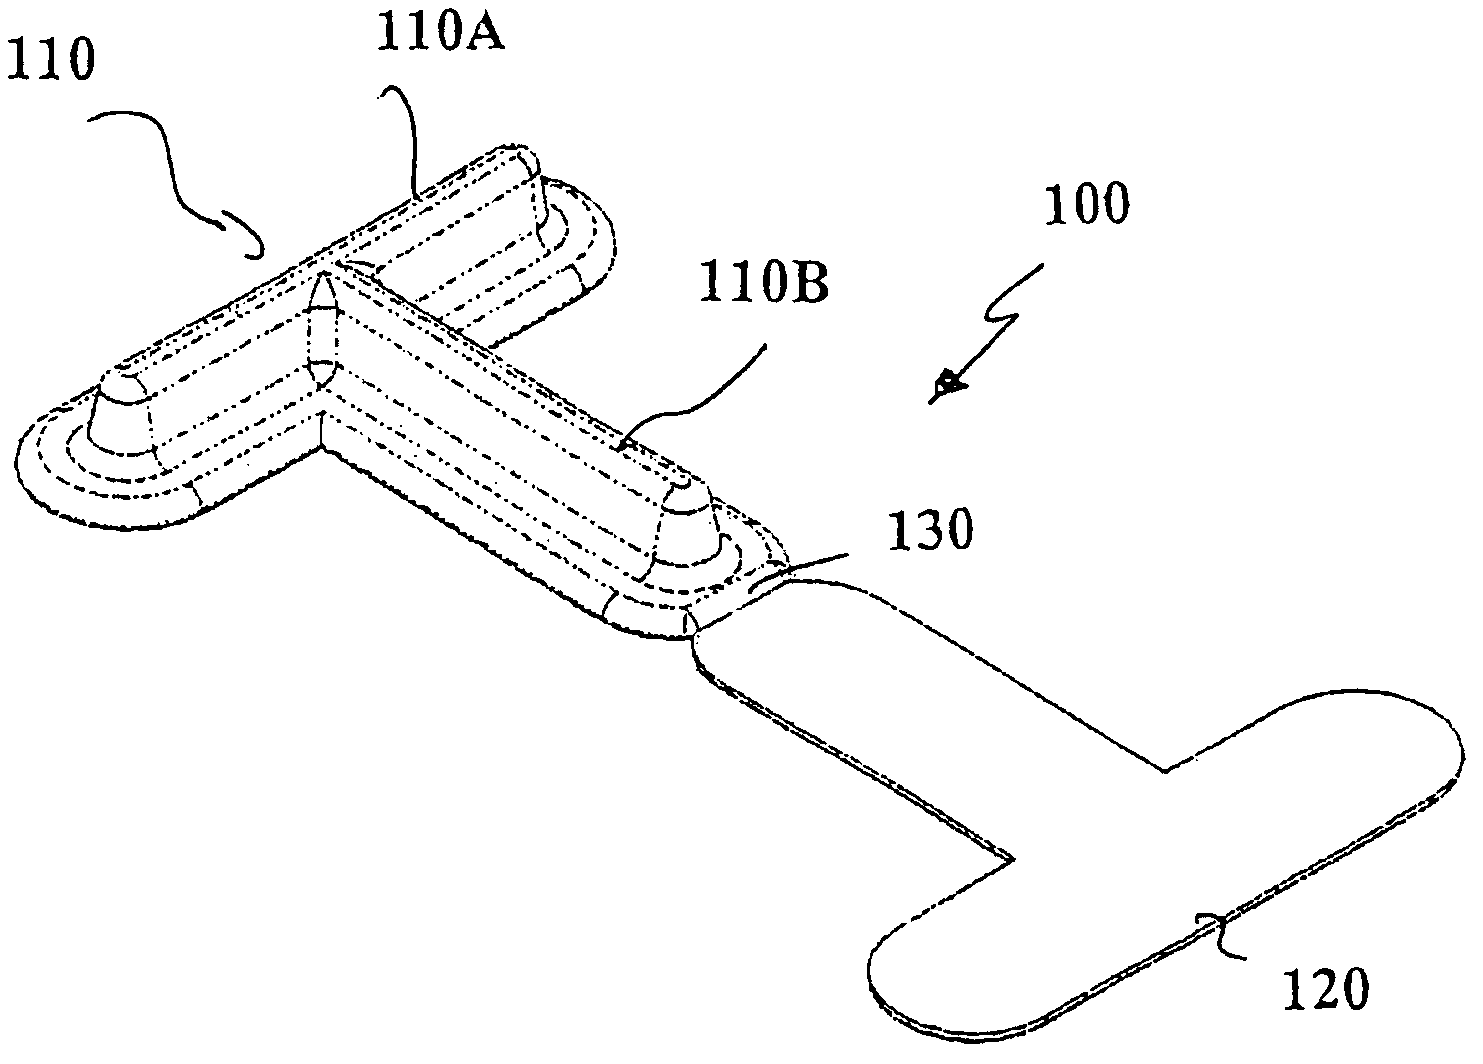 System for tracking a spatial position of an object via a tracking system